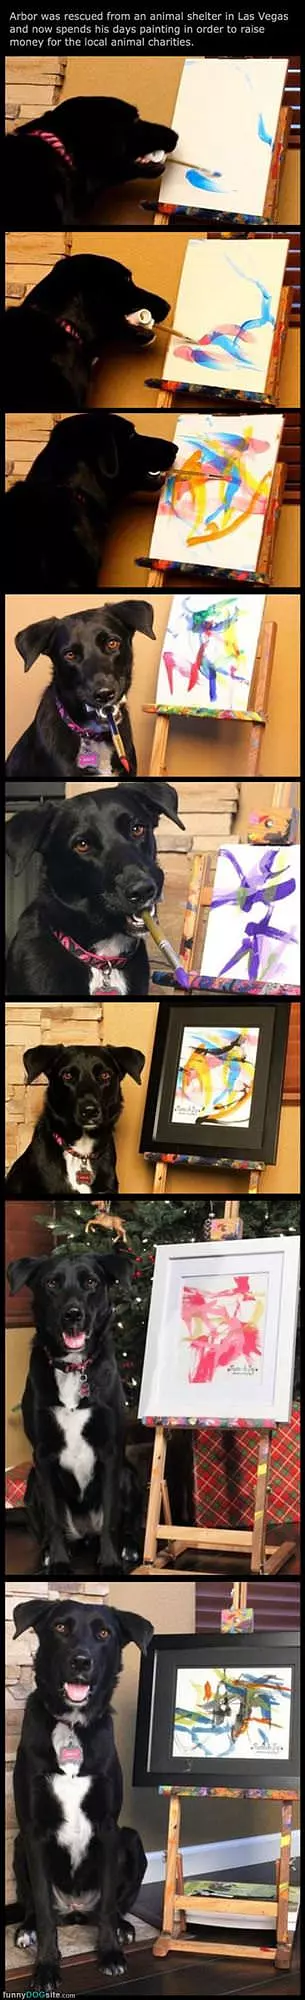 This Dog Is An Artist